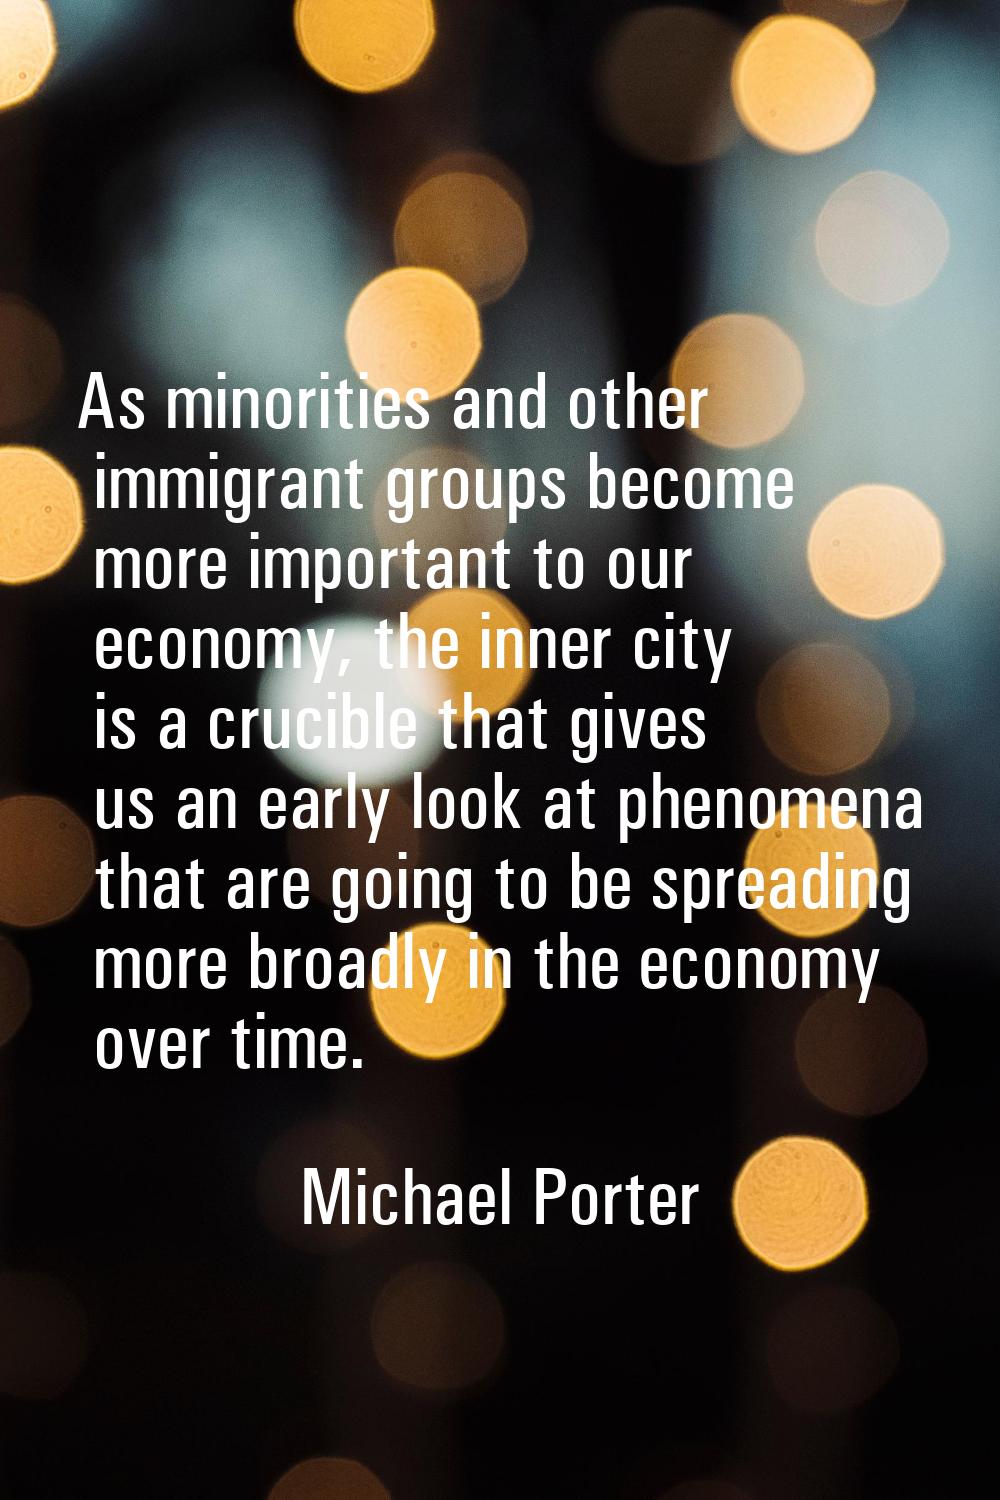 As minorities and other immigrant groups become more important to our economy, the inner city is a 